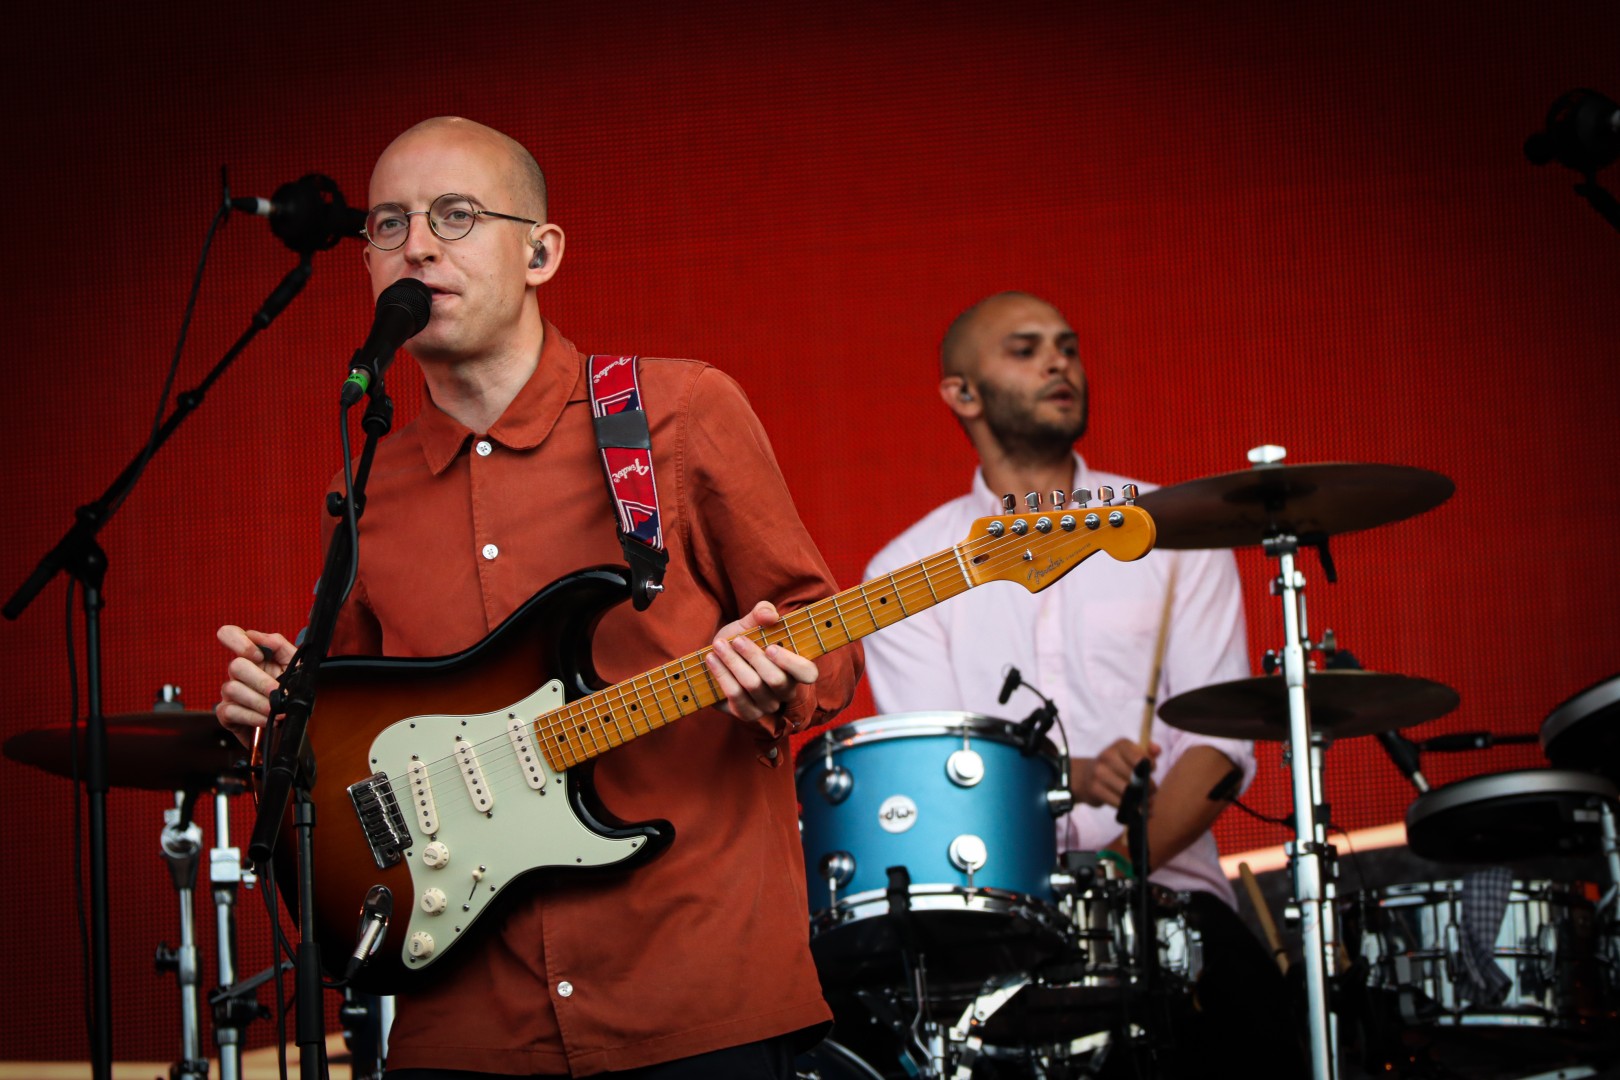 Bombay Bicycle Club at Henham Park in Suffolk on July 25, 2021 (052214f8c6)